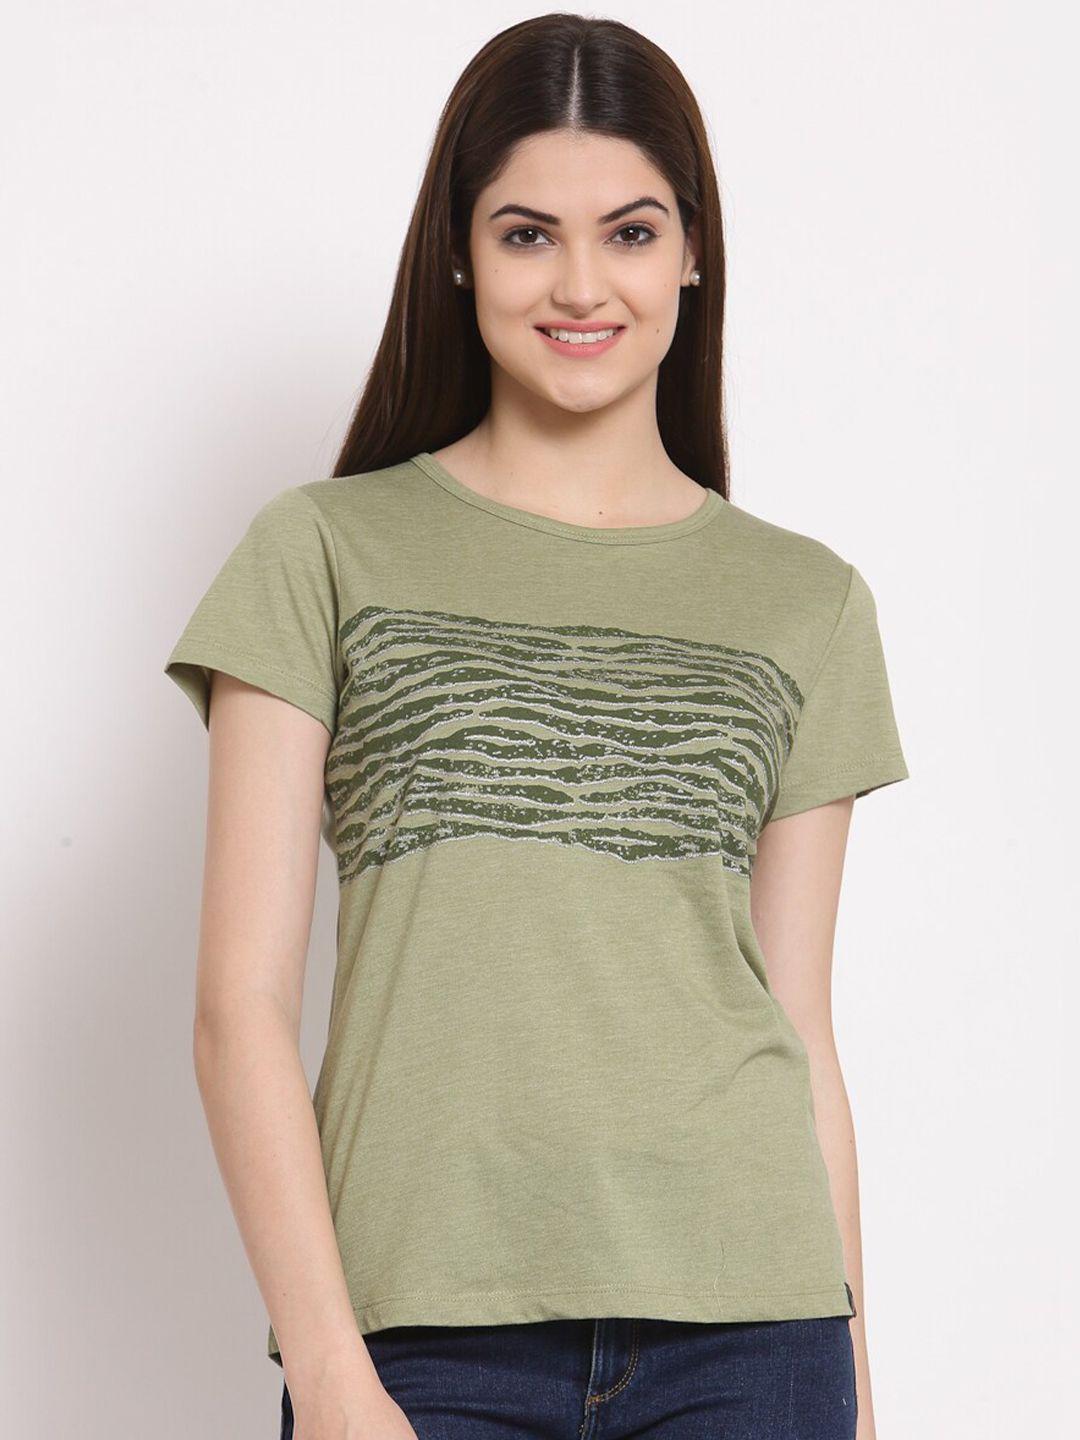 juelle-women-olive-green-printed-round-neck-pure-cotton-t-shirt